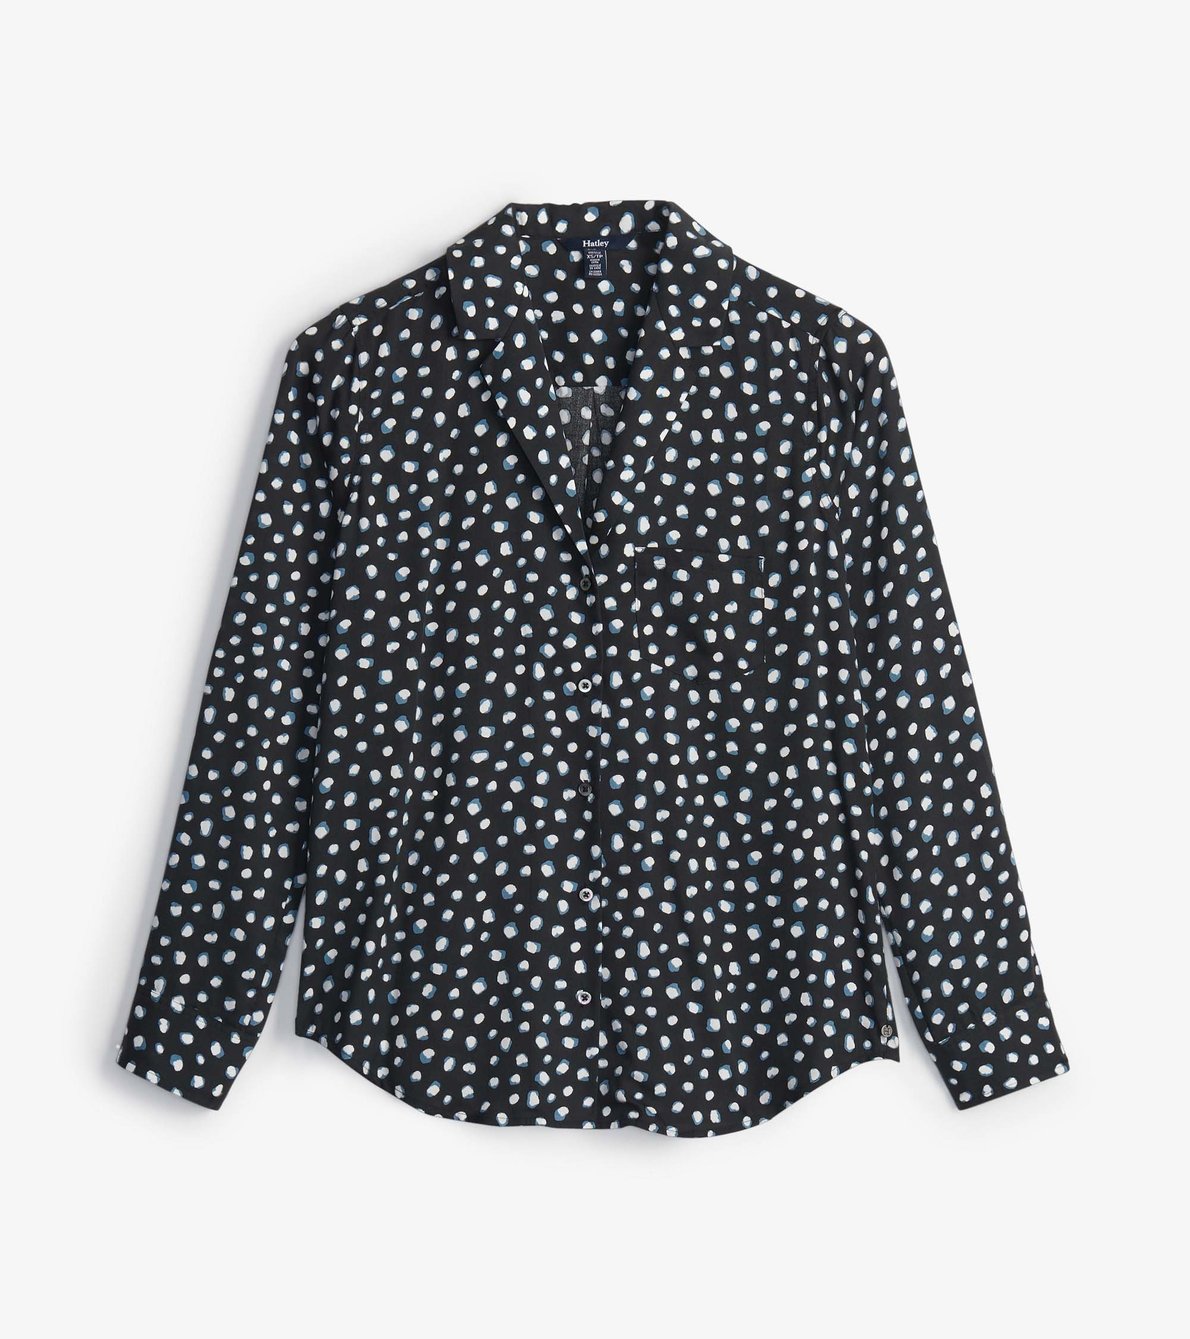 View larger image of Ariane Shirt - Lots of Dots